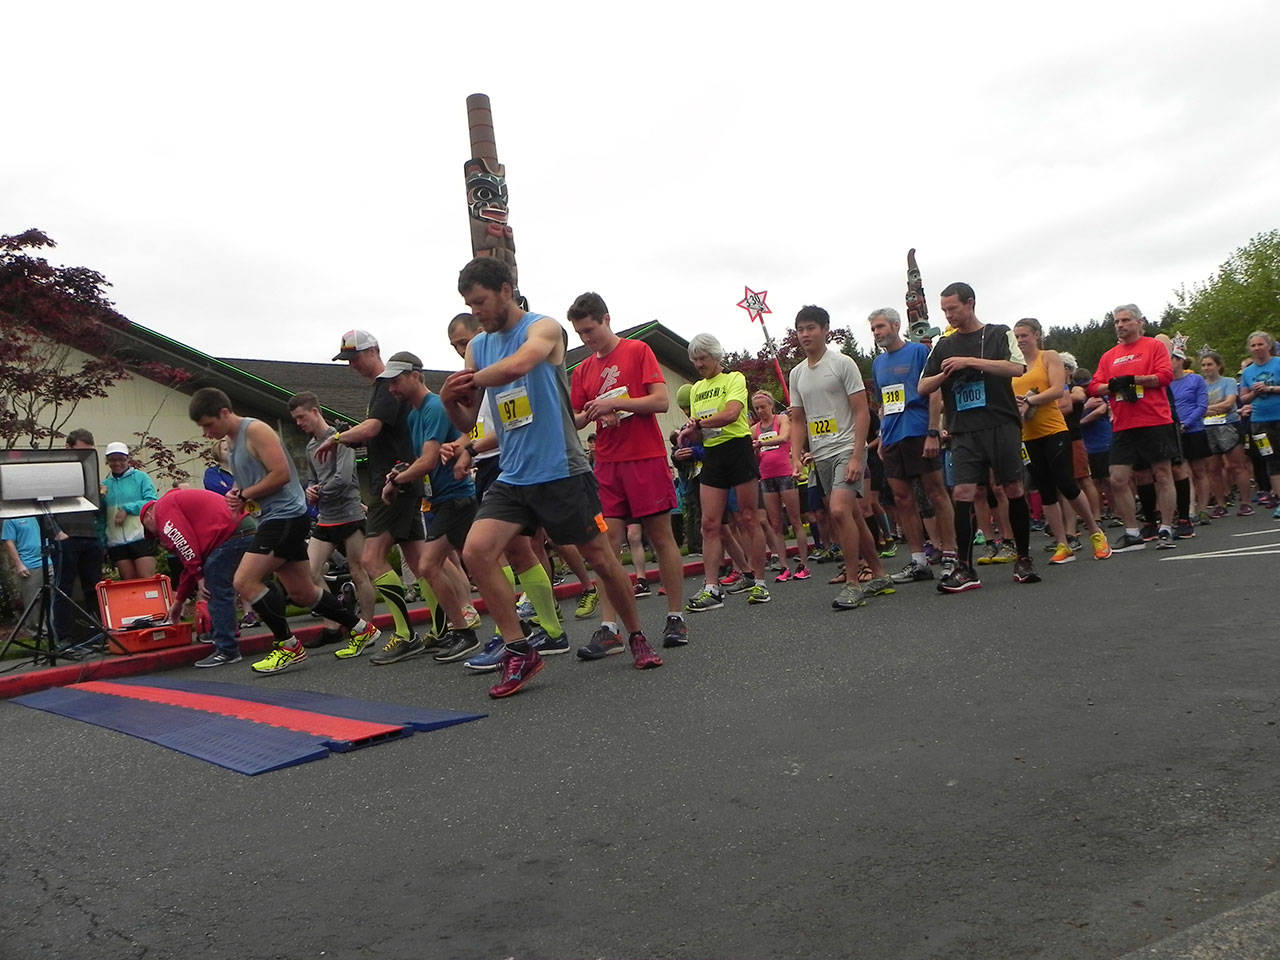 Hundreds of runners start the North Olympic Discovery Marathon at 7 Cedars Casino in Blyn on Saturday morning. They started at 7:30 a.m. and headed for a finish in downtown Port Angeles. (Mark Swanson/Peninsula Daily News)